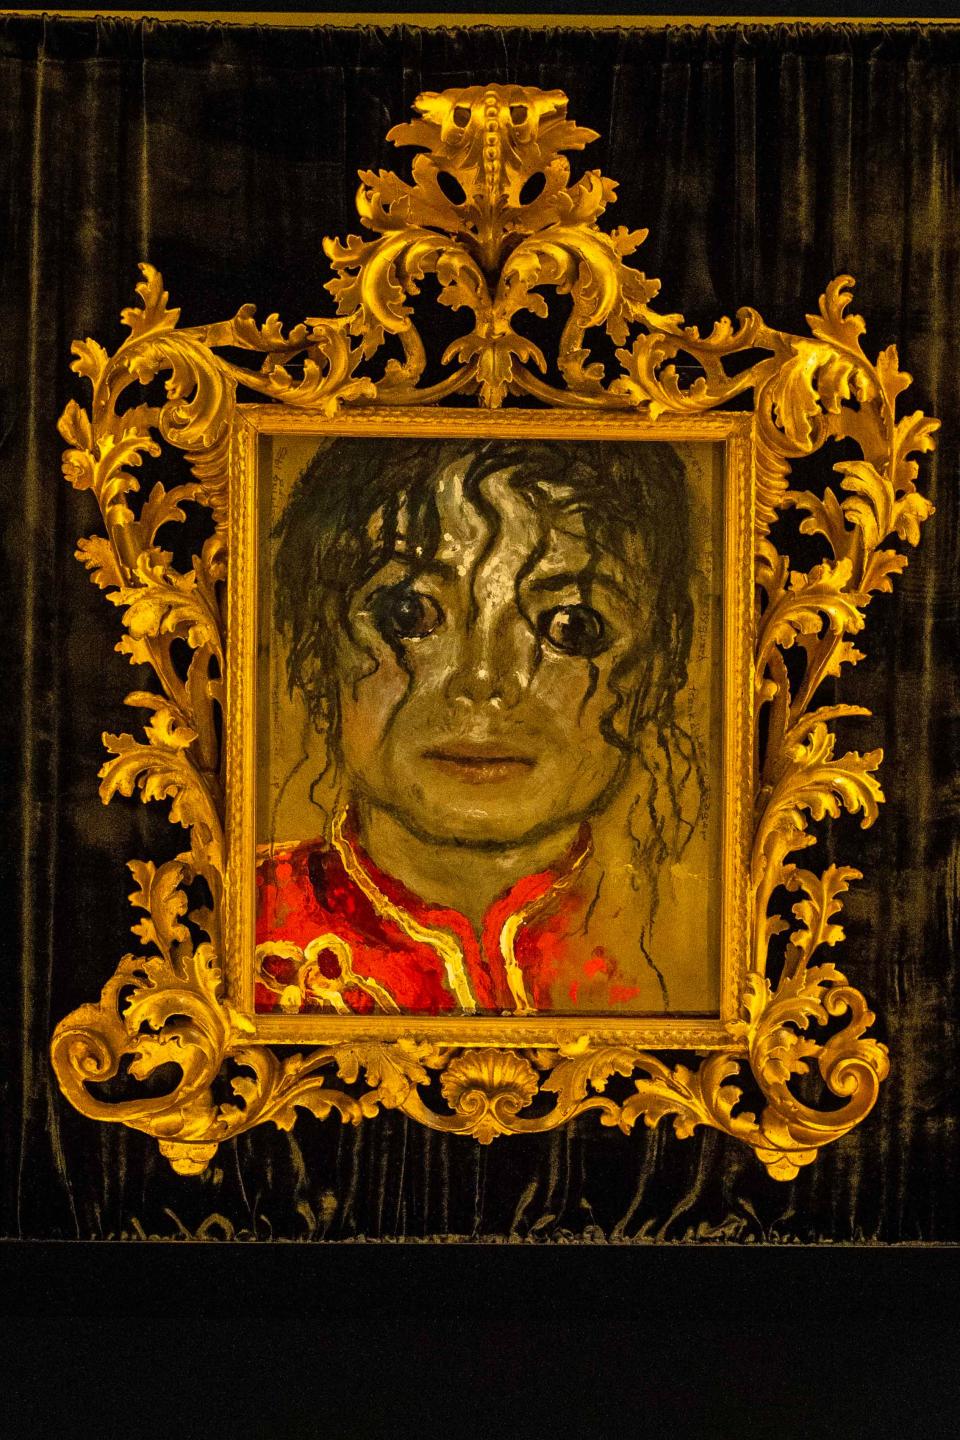 Artist Jamie Wyeth's painting entitled "Portrait of Michael Jackson'' is featured during the press preview of Wyeth's new exhibition "Jamie Wyeth: Unsettled'' at the Brandywine Museum of Art in Chadds Ford, Pennsylvania, on Friday, March 15, 2024. The exhibit features more than 50 works drawn from museum and private collections across the country that "trace a persistent vein of intriguing, often disconcerting imagery," over Wyeth's career.